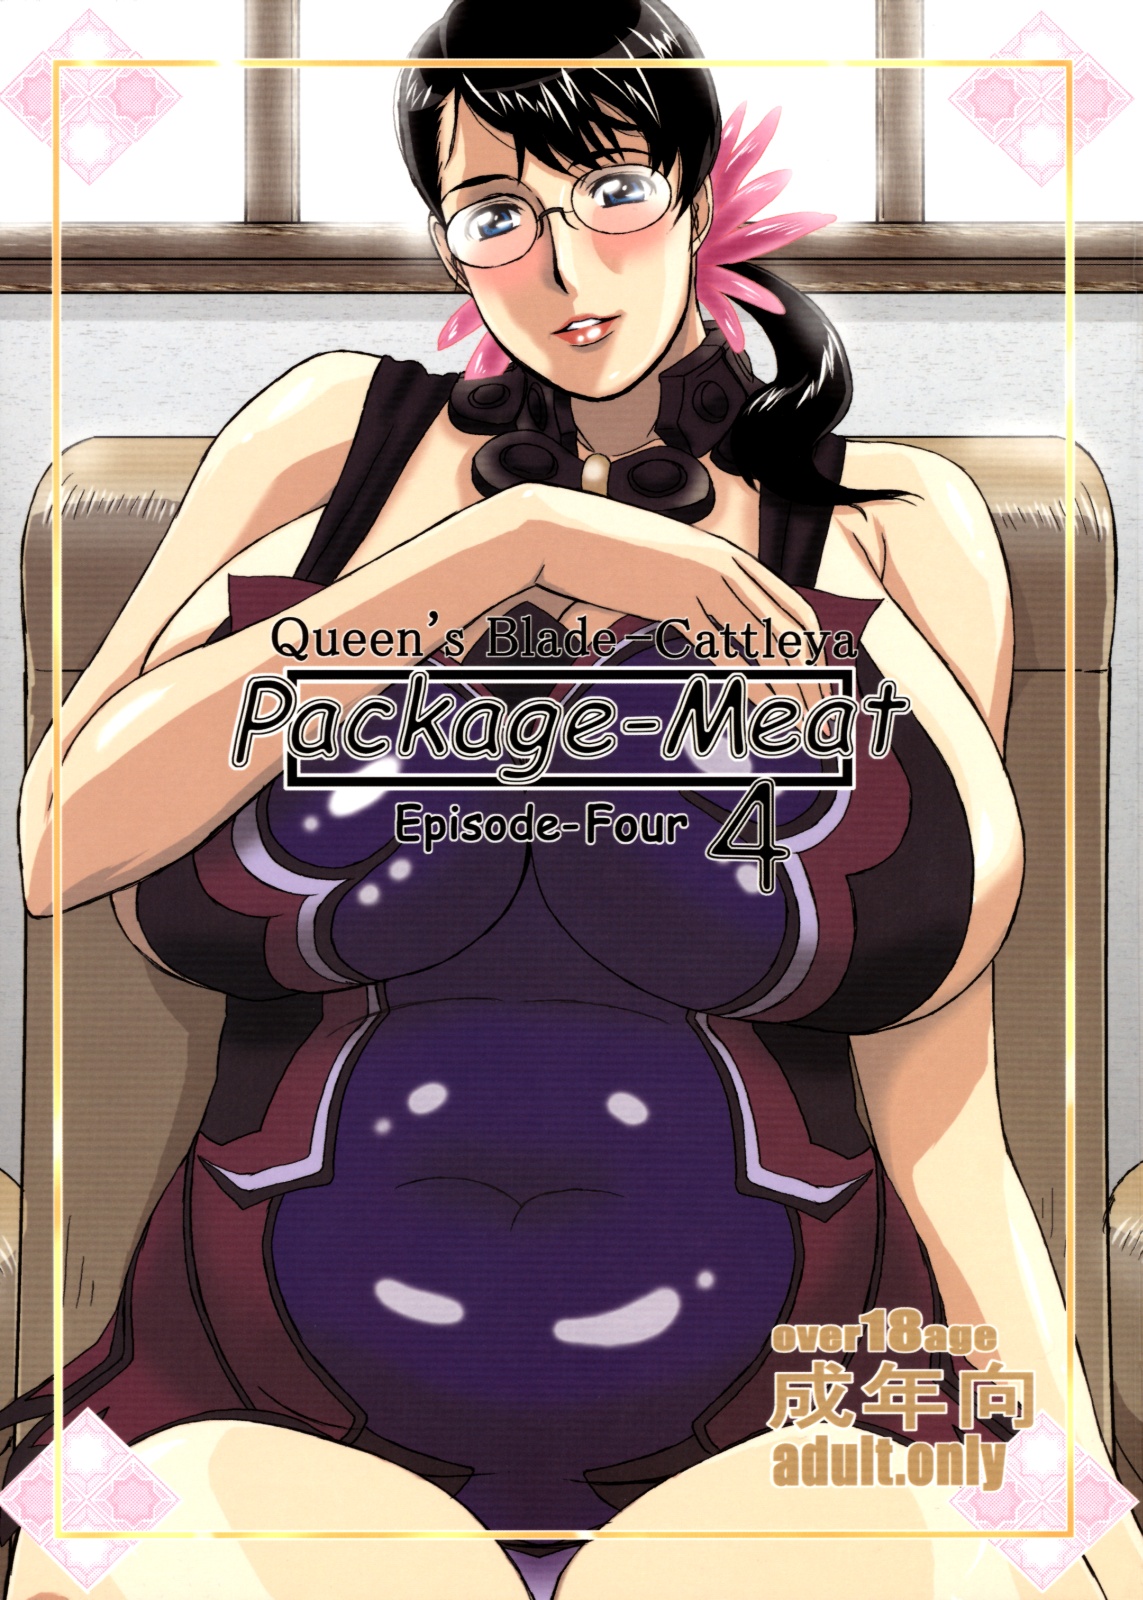 (C75) [Shiawase Pullin Dou (Ninroku)] Package Meat 4 (Queen's Blade) [Italian] {hentai-archive.net} (C75) [しあわせプリン堂 (認六)] Package Meat 4 (クイーンズブレイド) [イタリア翻訳]